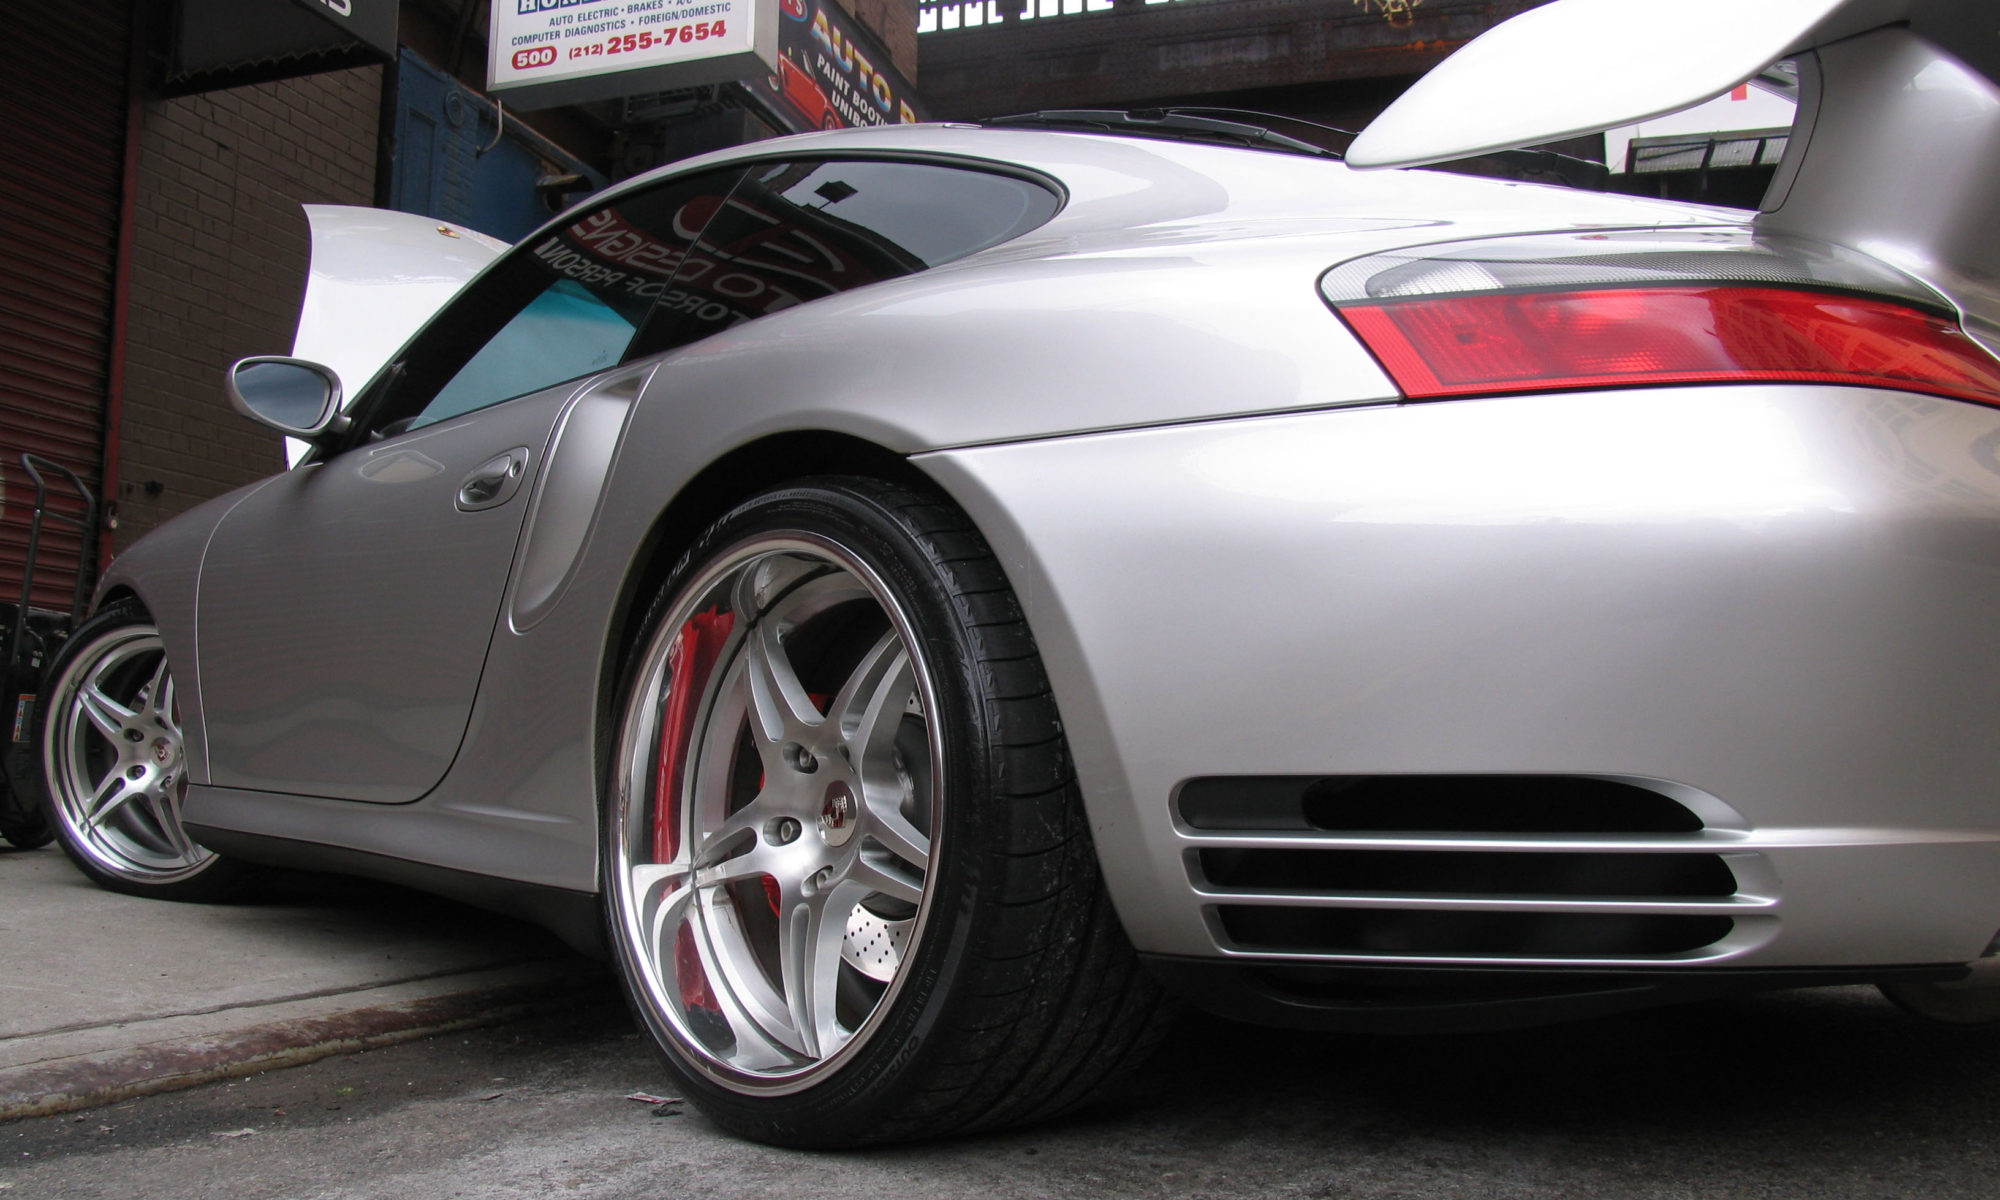 911 turbo coupe. Services: Rear wing install, custom wheel and tire package and ceramic window tint.